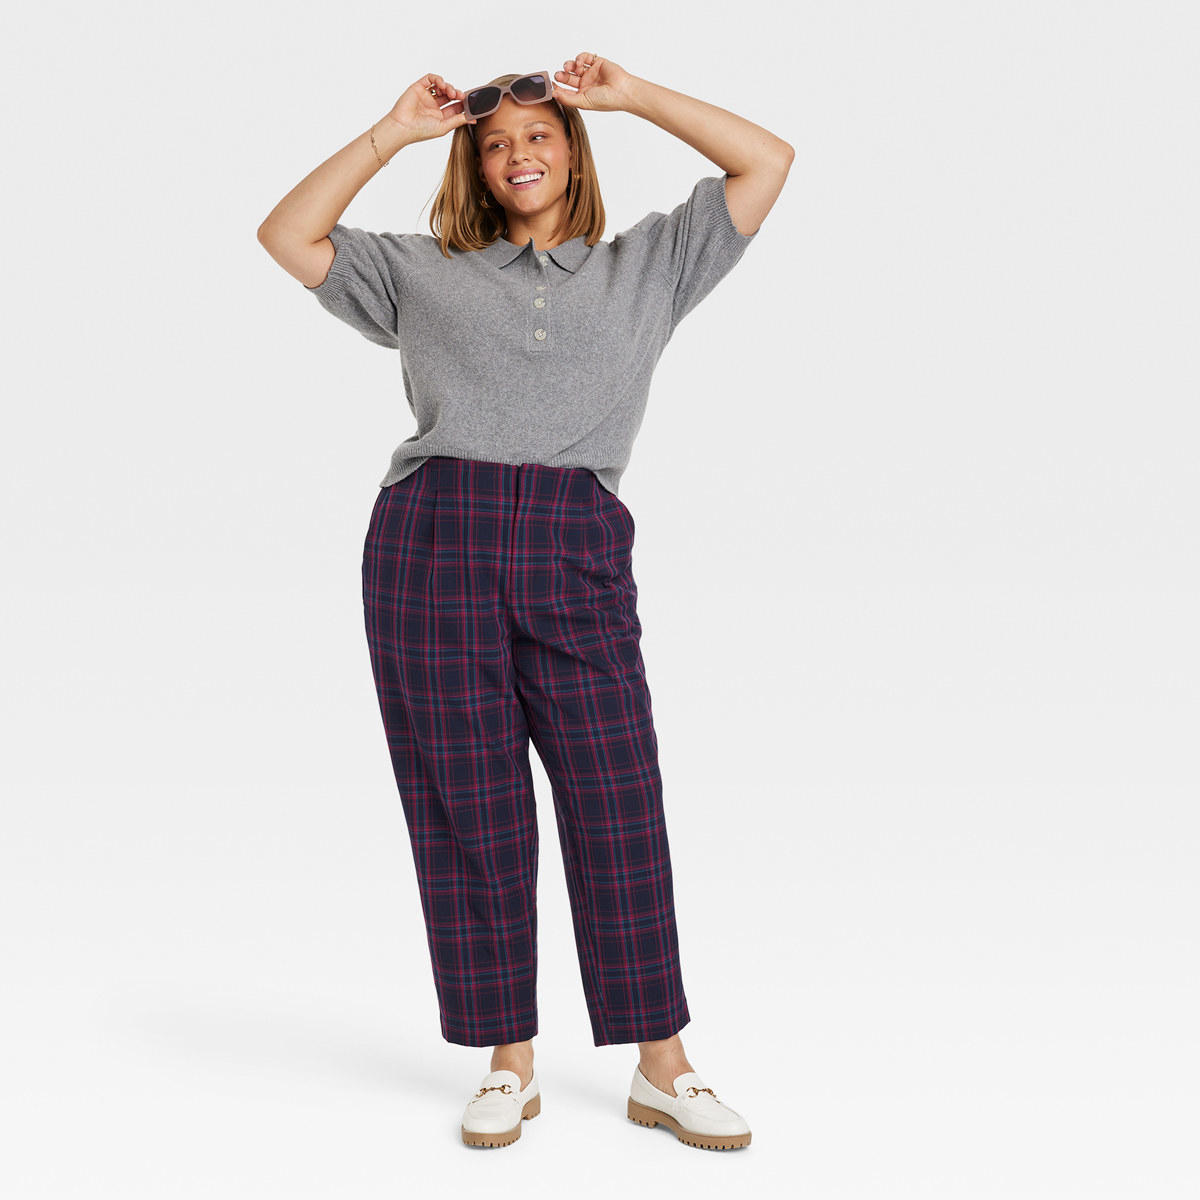 Smiling woman hold sunglasses while wearing polo shirt and plaid pants